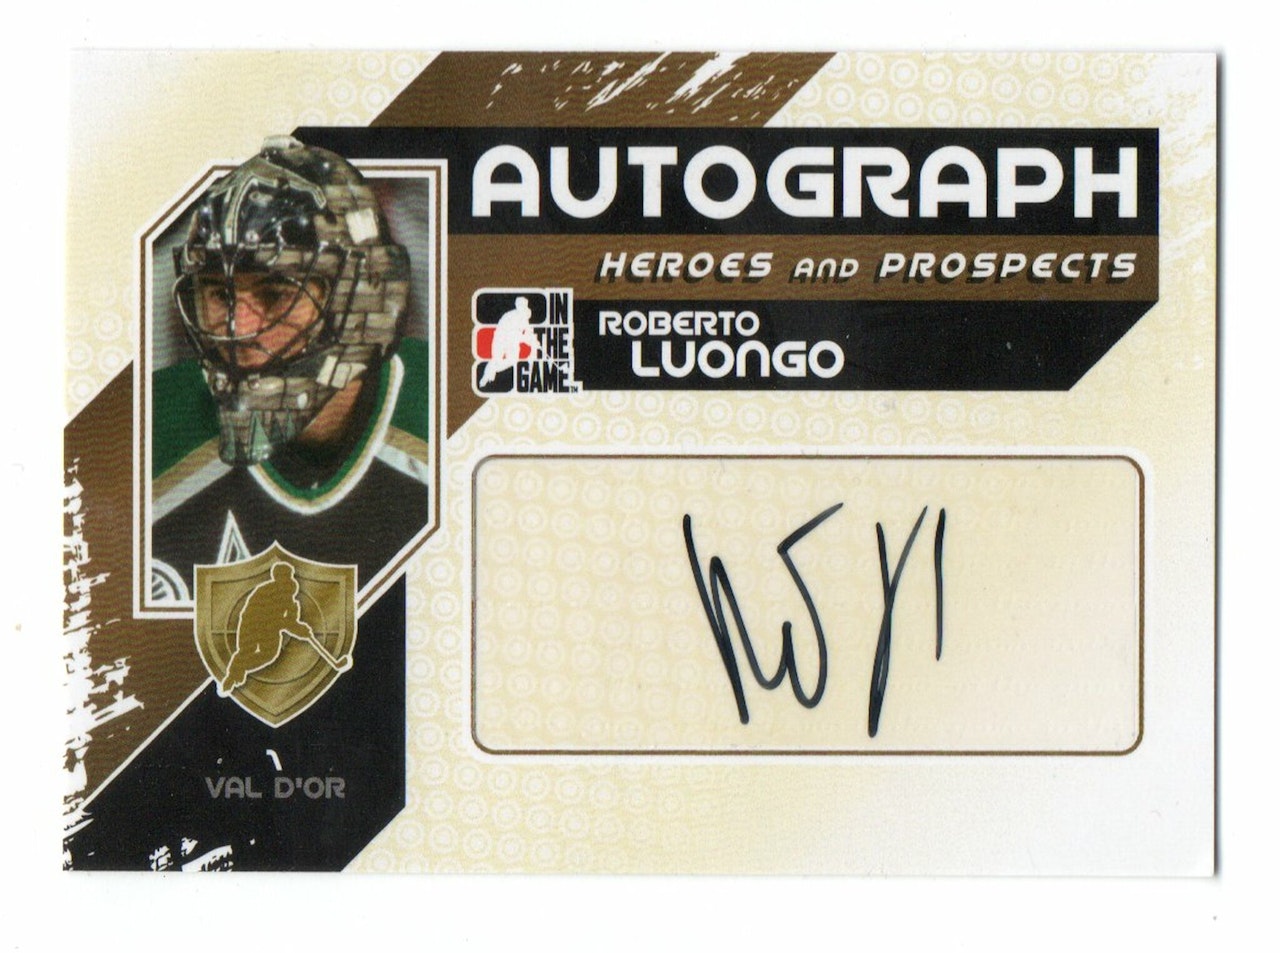 2010-11 ITG Heroes and Prospects Autographs #ARLU Roberto Luongo SP (200-192x3-CANUCKS+NHLPANTHERS)